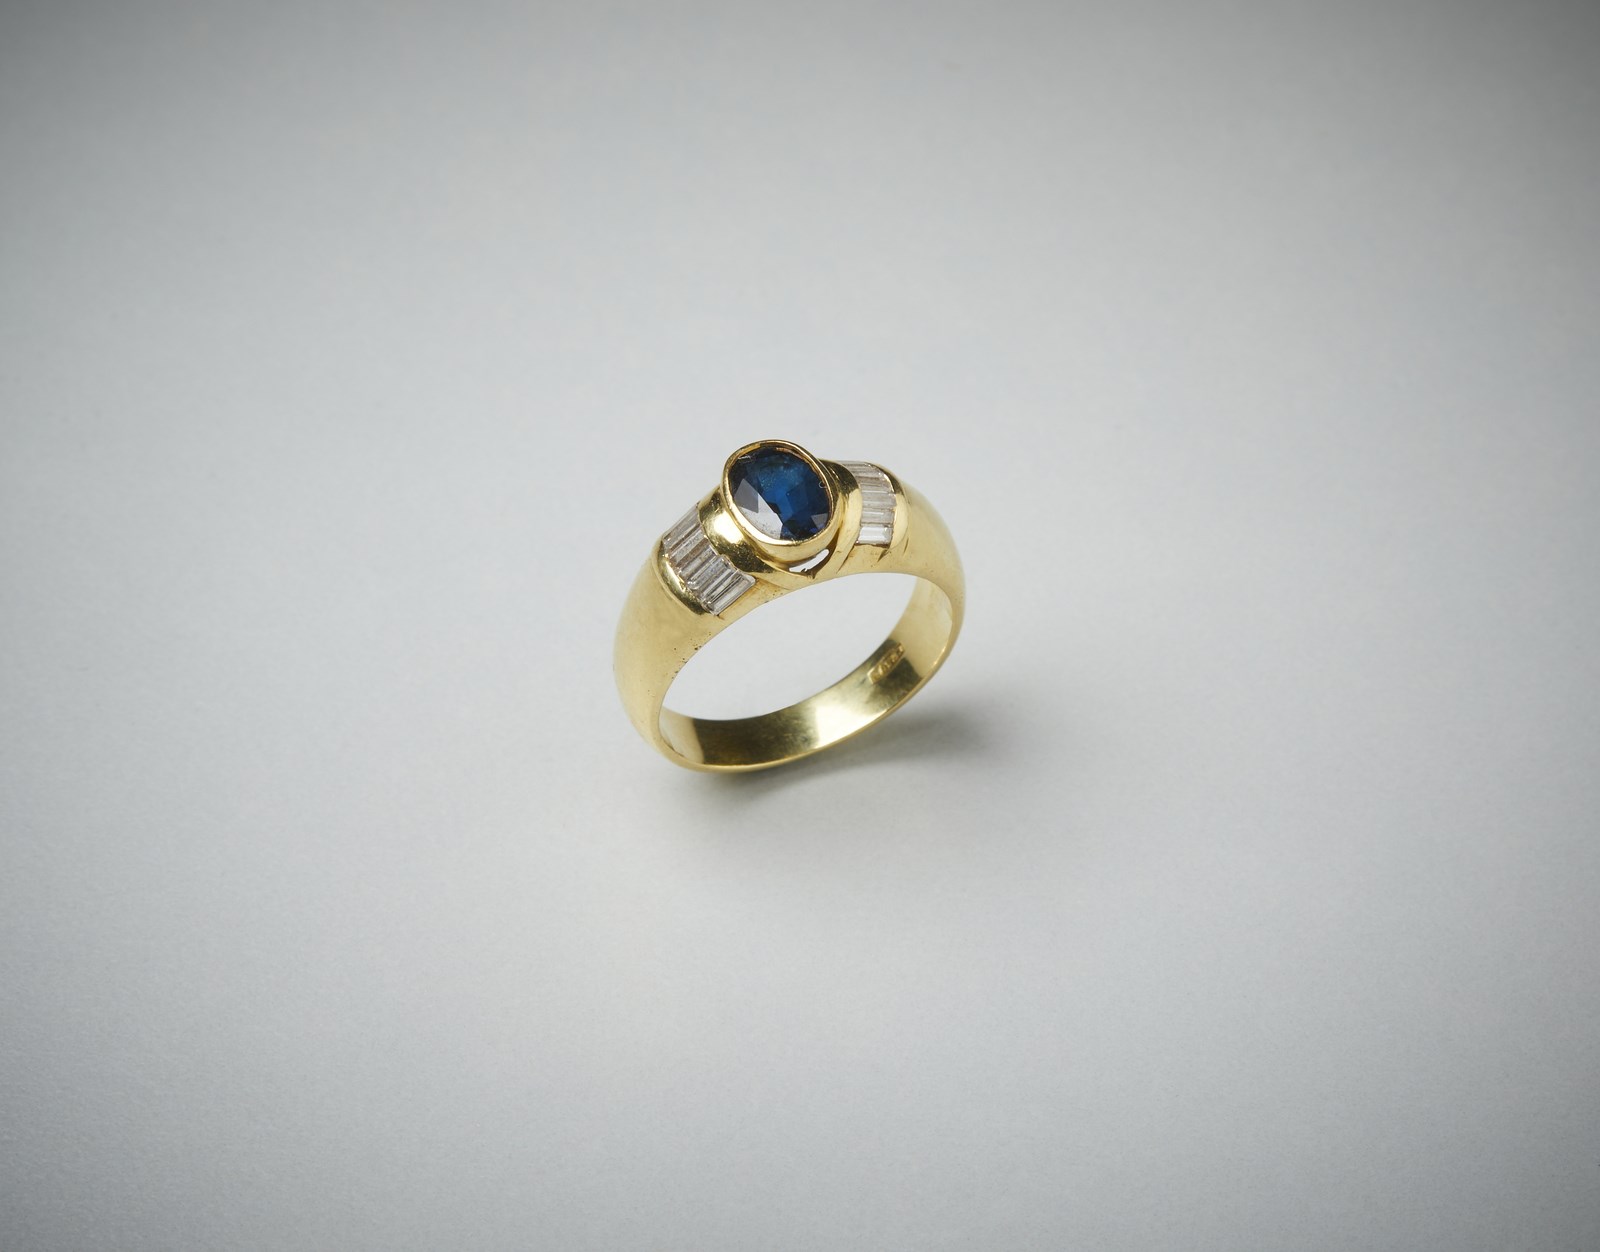 Yellow gold band ring 750/1000 with oval blue sapphire of approx. 0.70 ct and white diamonds baguette cut of 0.75 ct total approx.   (. )